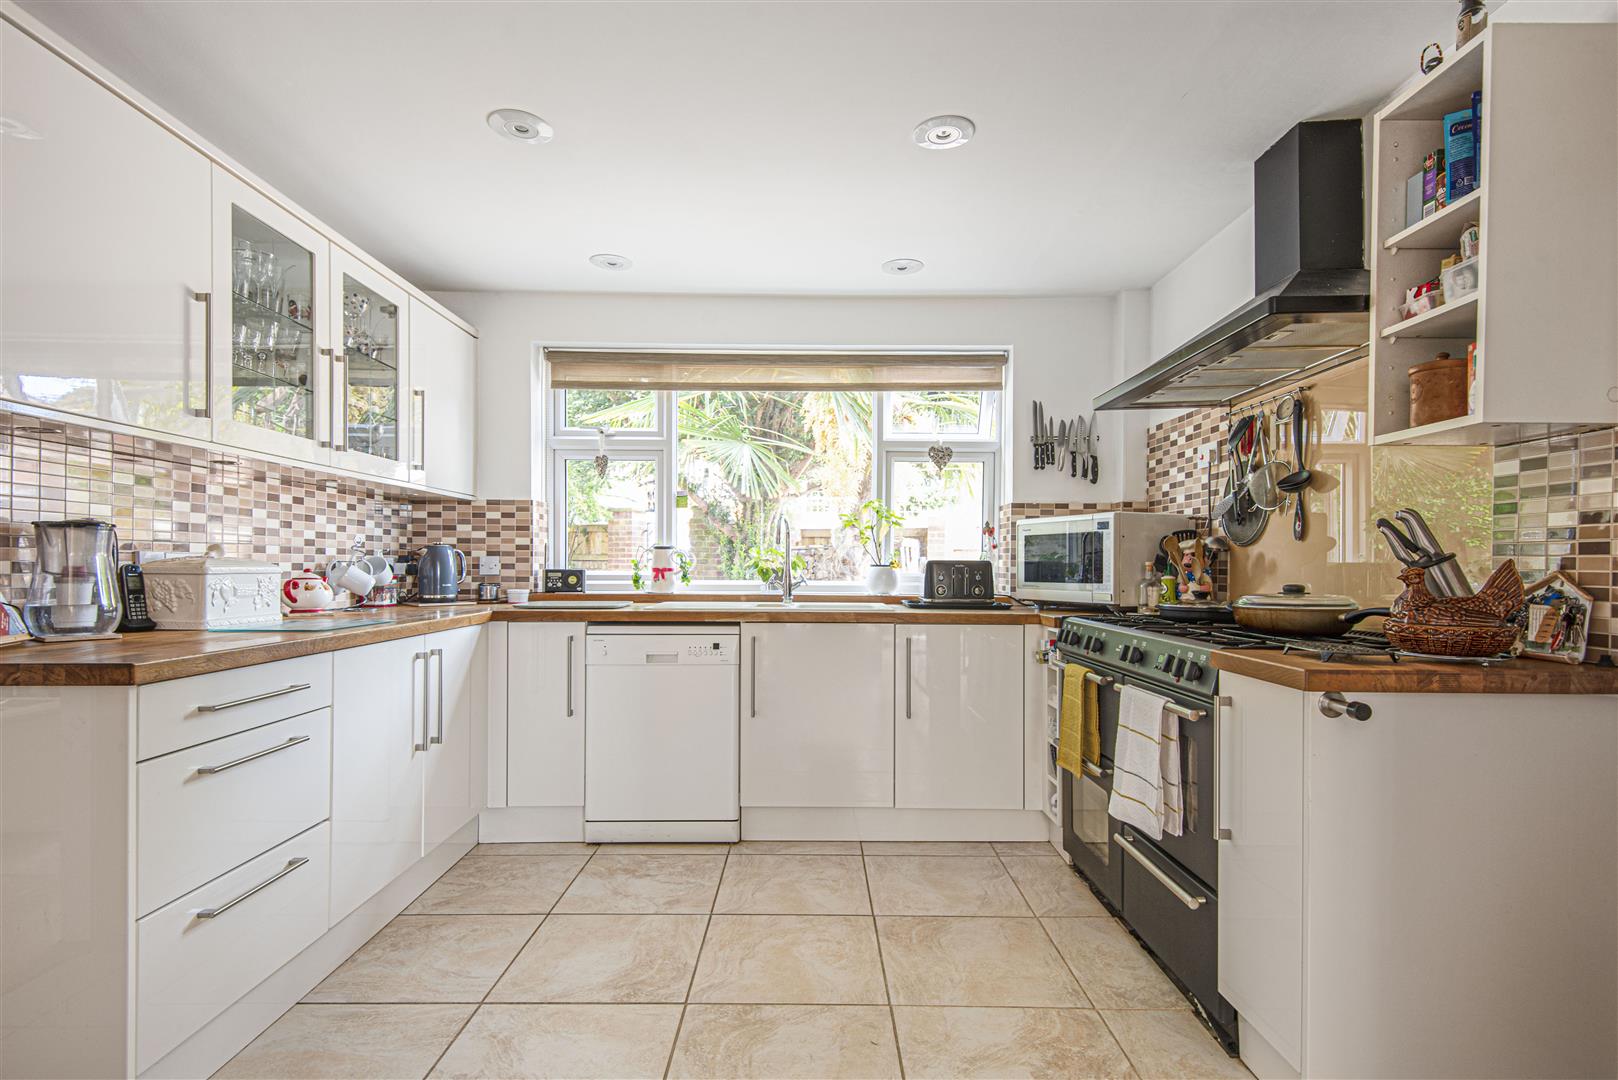 Cromwell Road Caversham house for sale in Reading